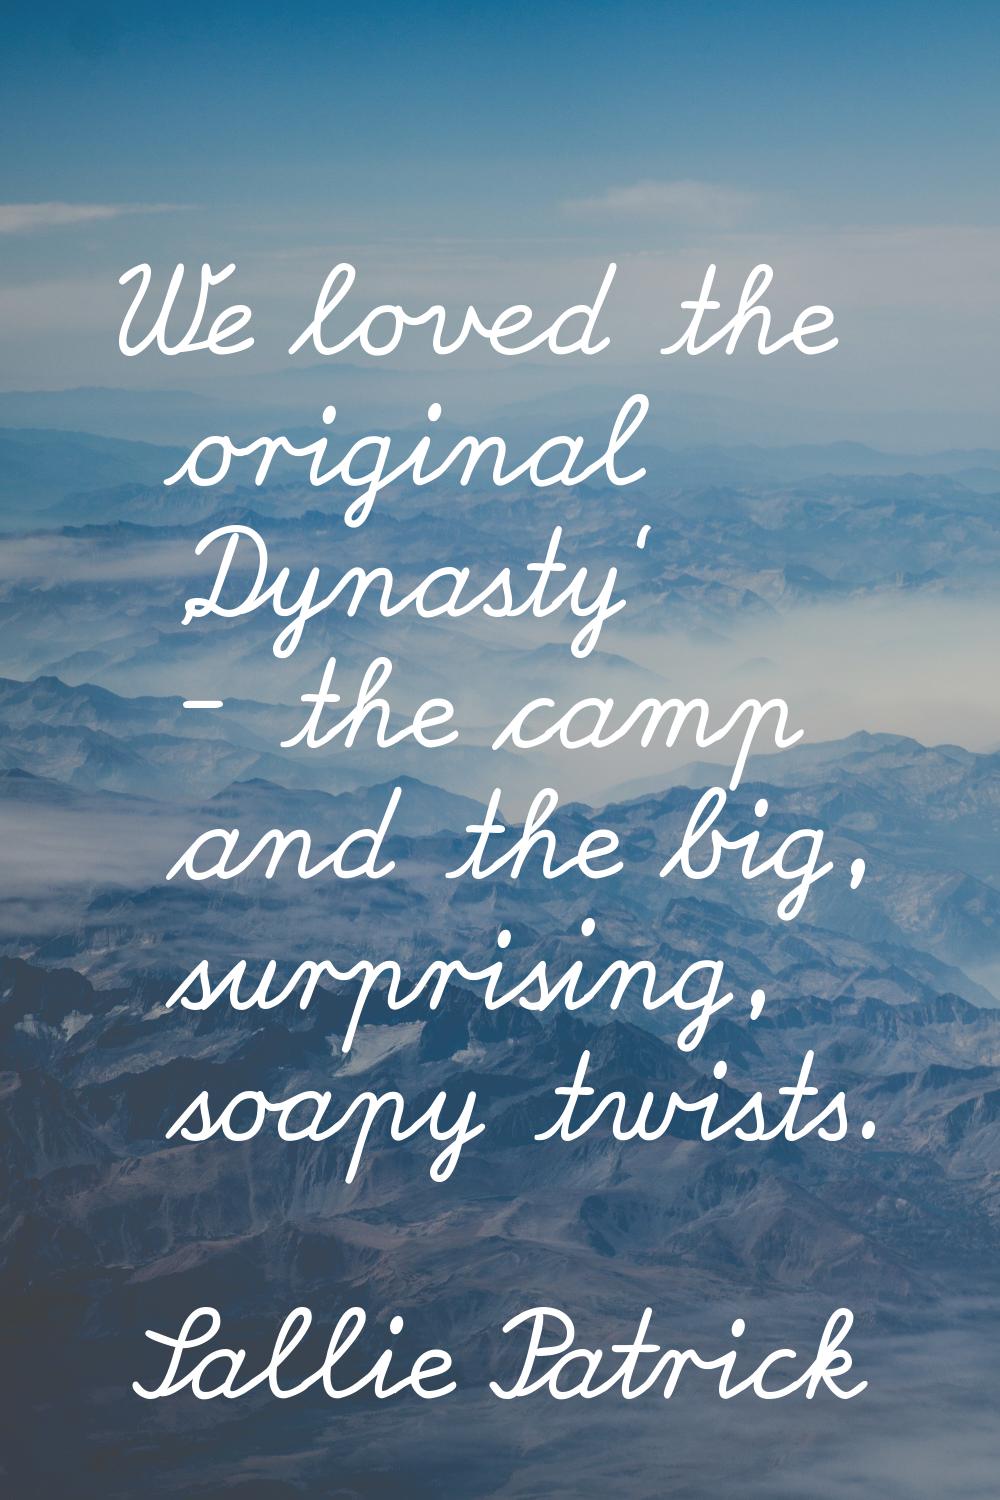 We loved the original 'Dynasty' - the camp and the big, surprising, soapy twists.